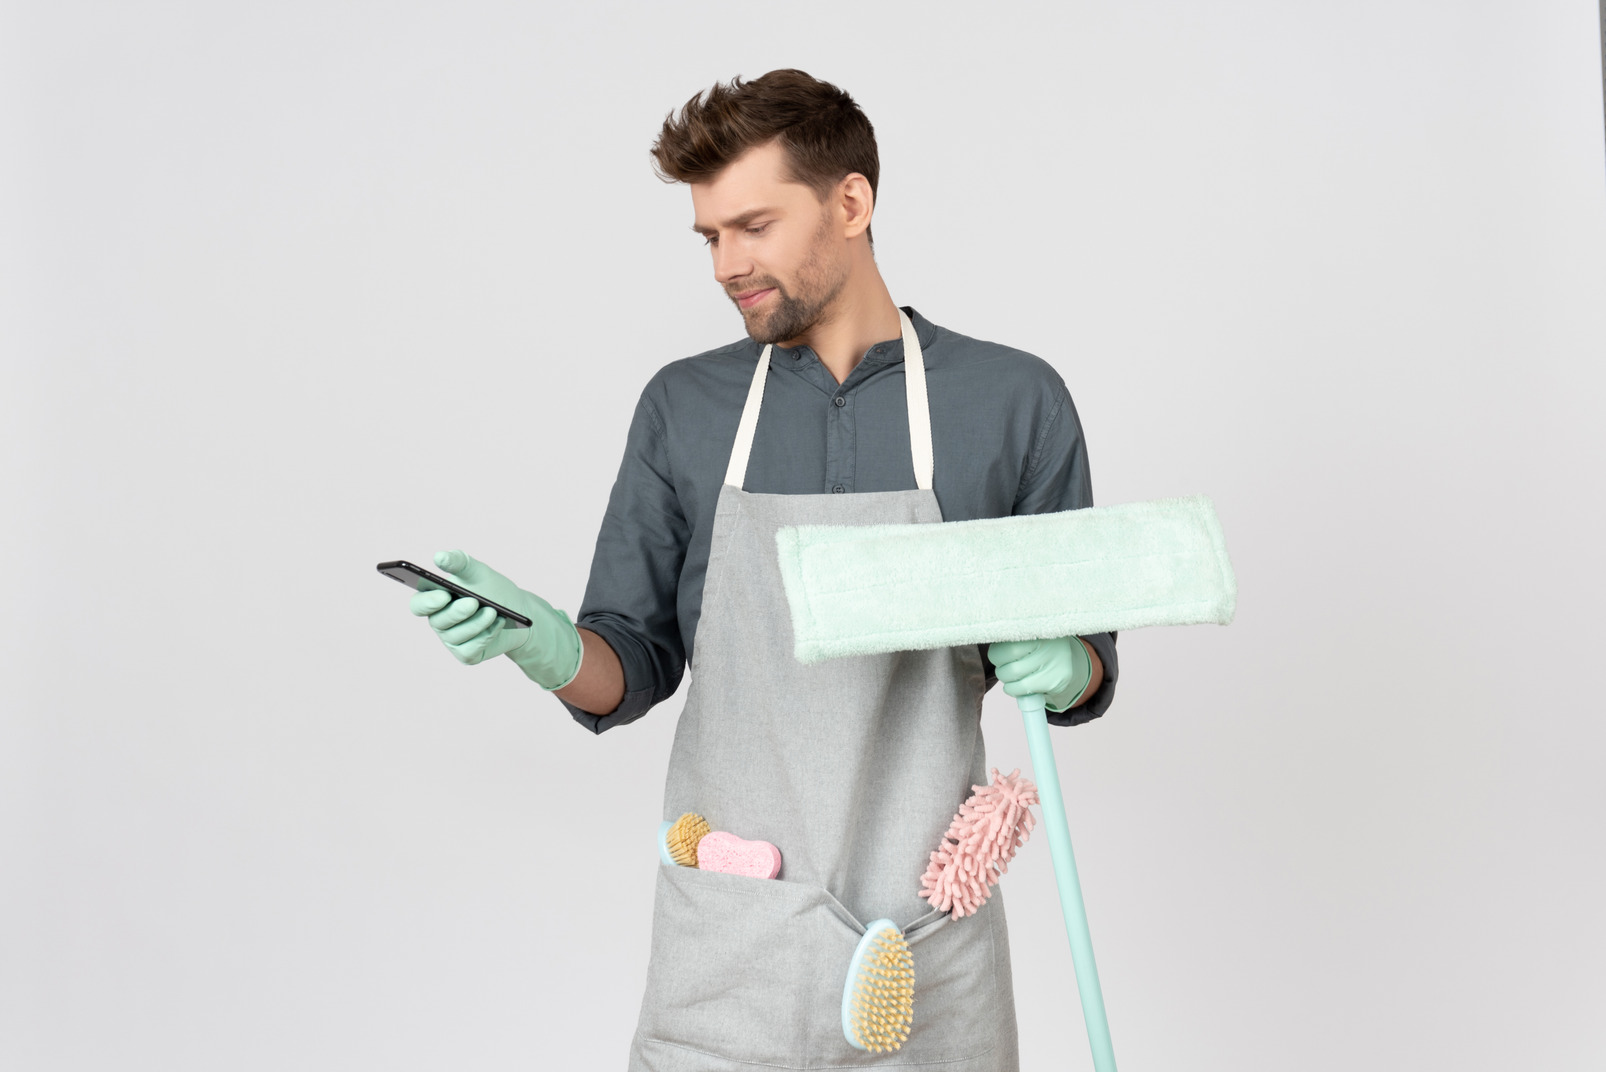 Young househusband holding mop and telephone